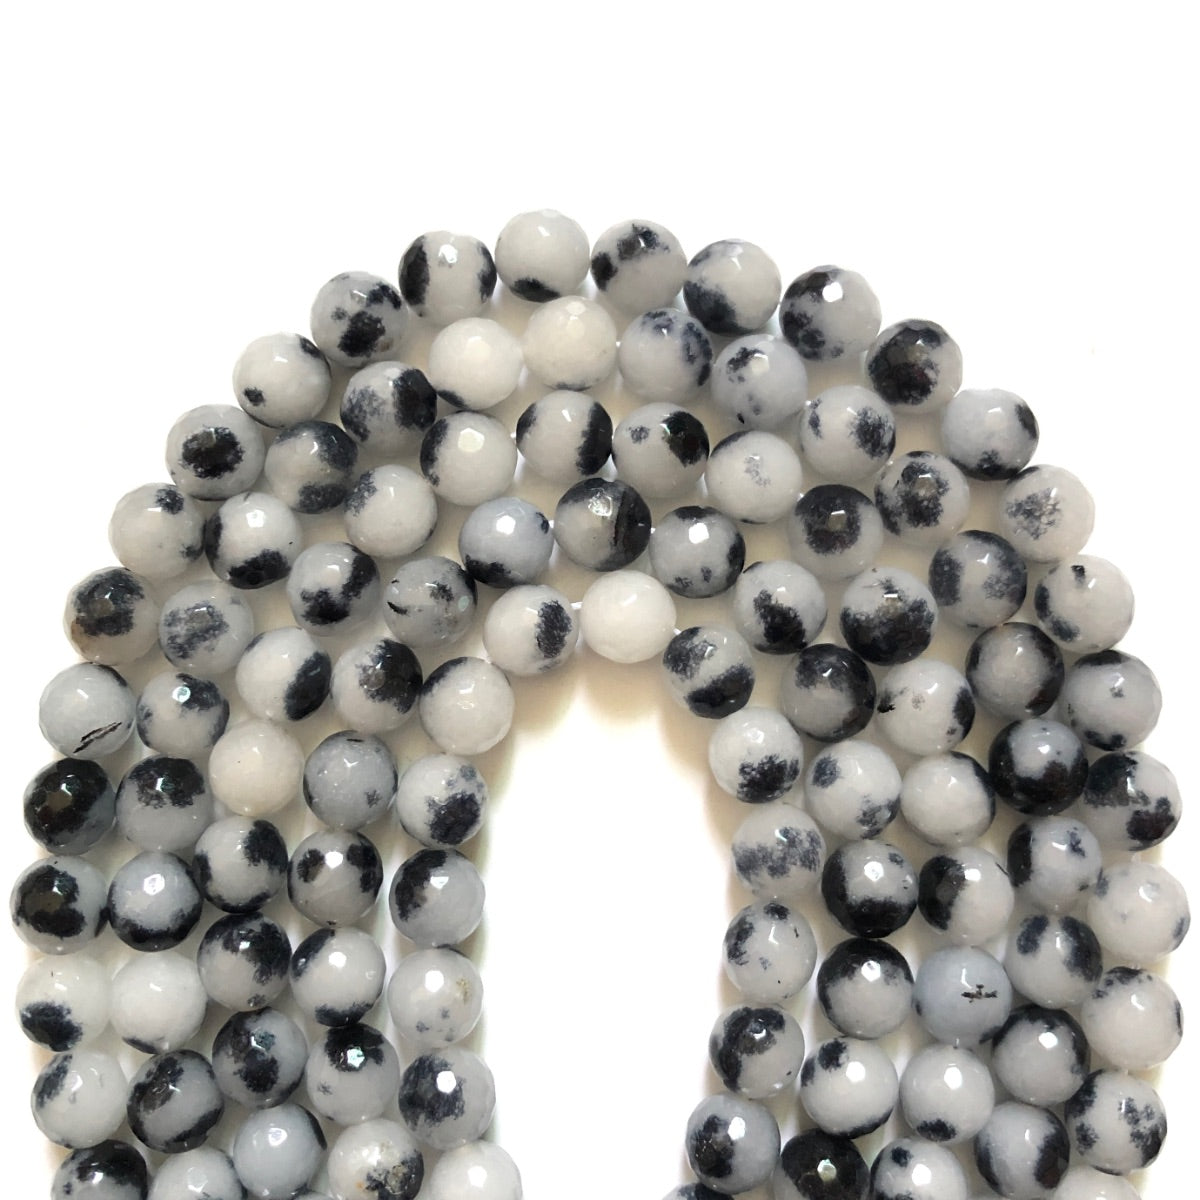 2 Strands/lot 10mm White Black Faceted Jade Stone Beads Stone Beads Faceted Jade Beads New Beads Arrivals Charms Beads Beyond